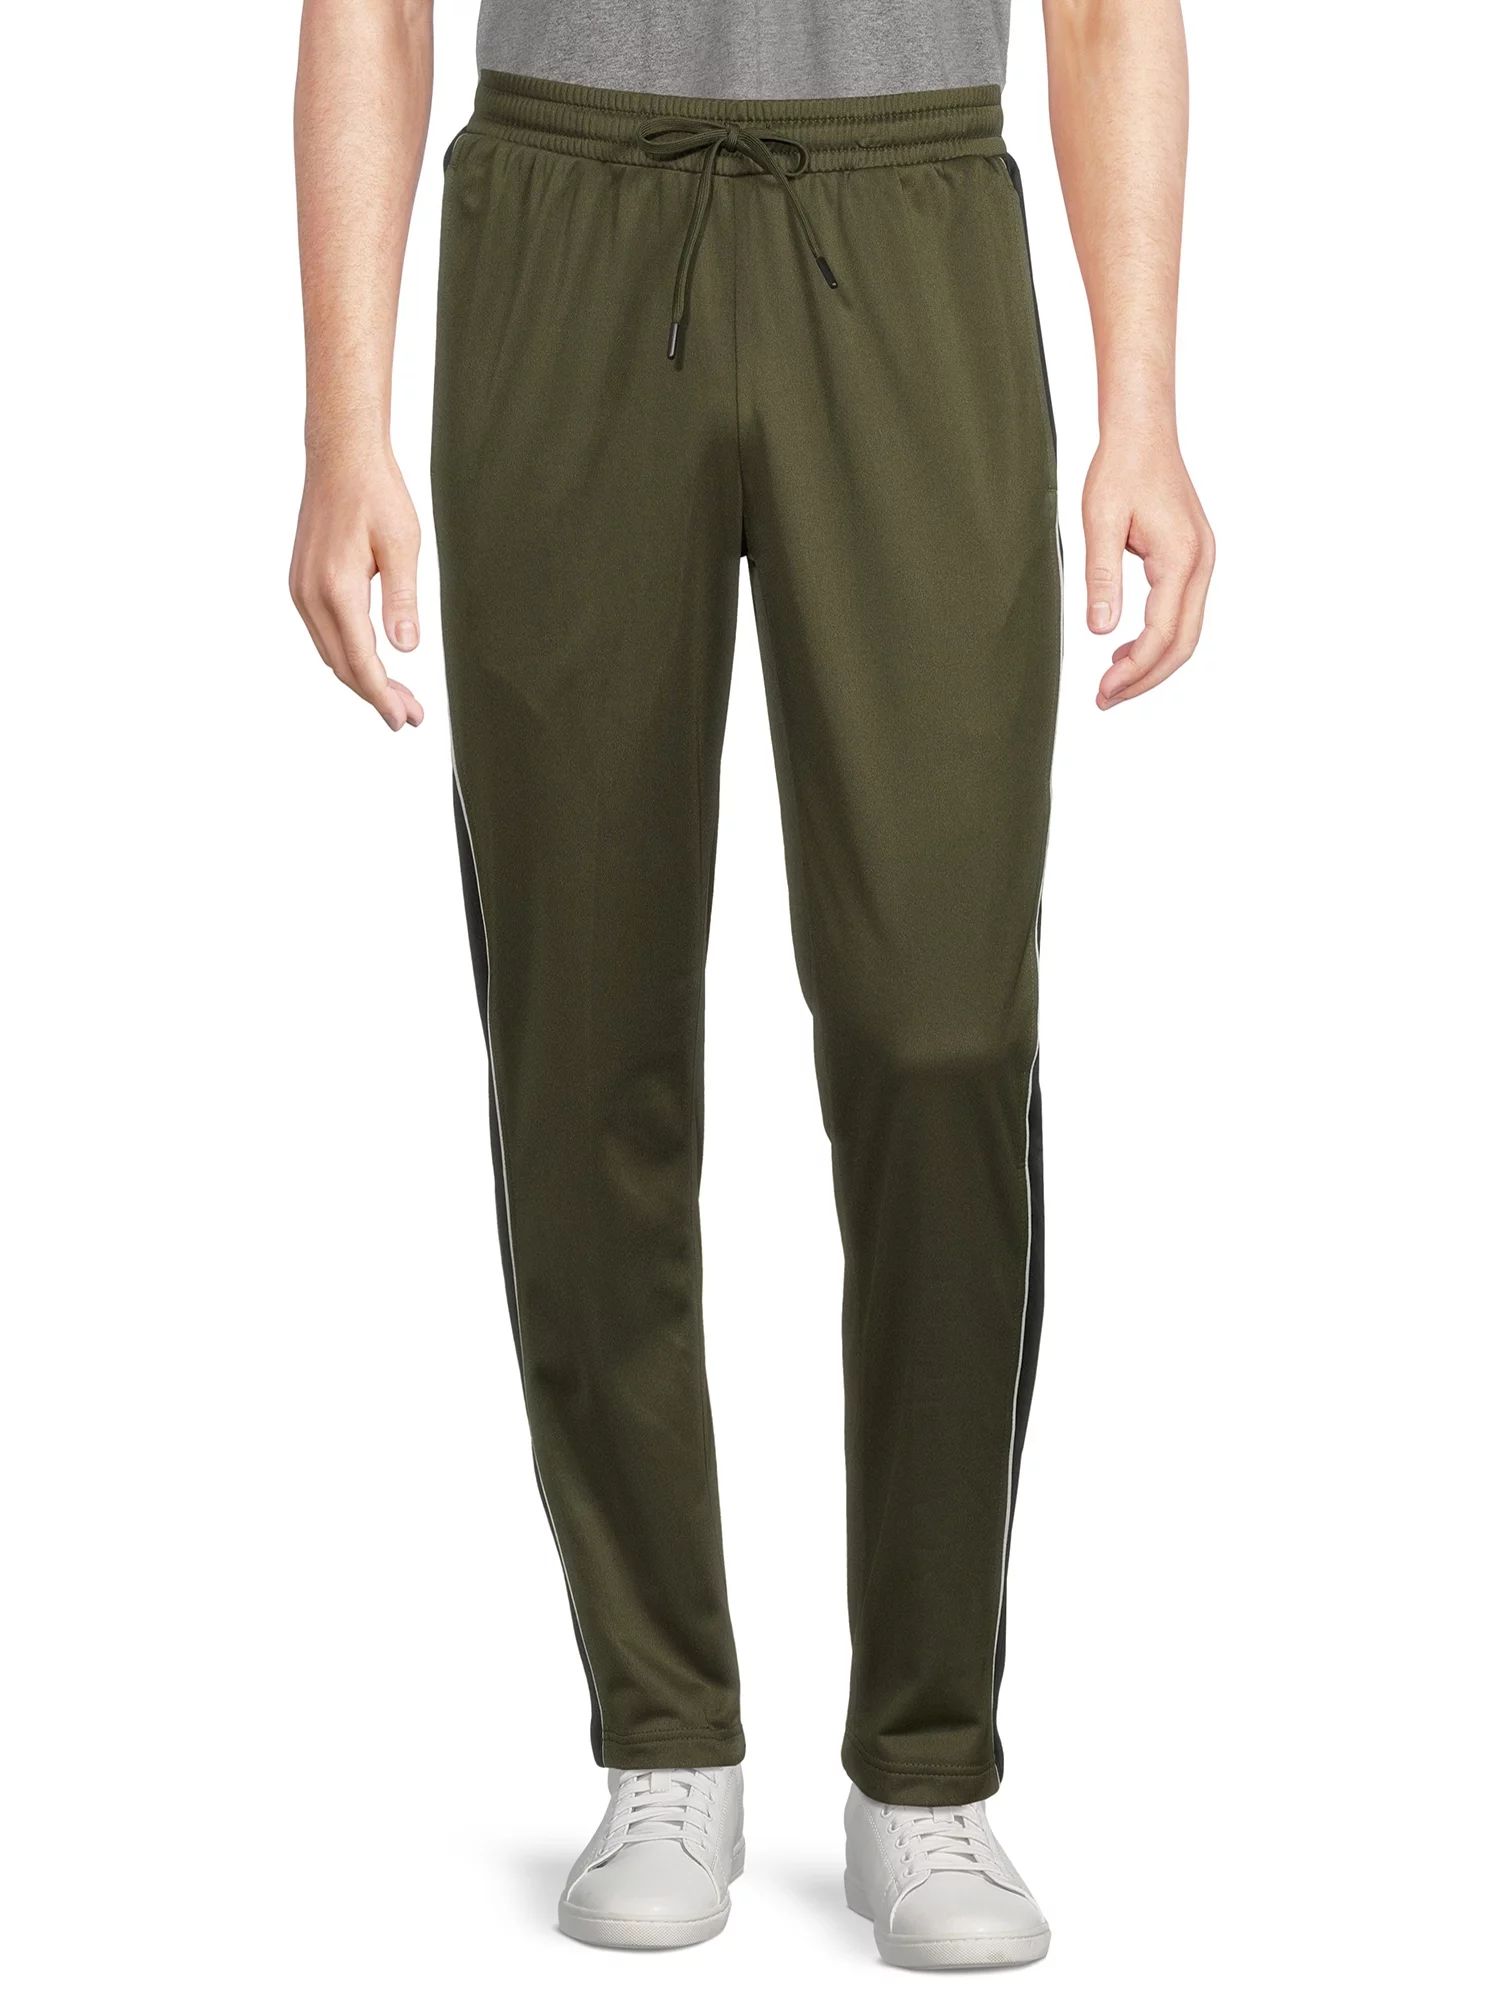 Athletic Works Men’s and Big Men’s Track Pants, Sizes up to 5XL | Walmart (US)